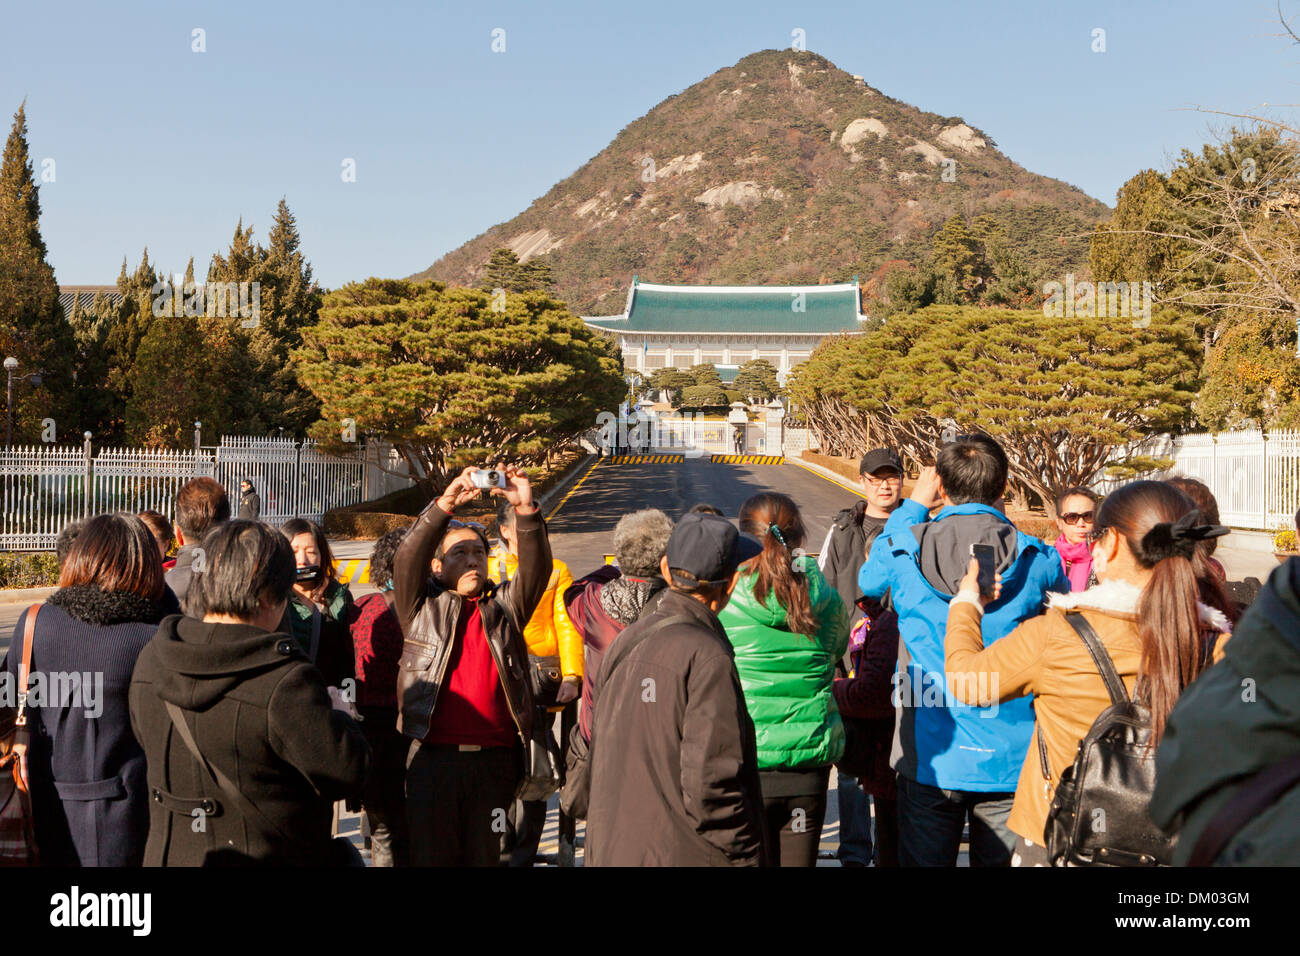 Visitors taking pictures in front of the main entrance of Cheongwadae (Blue House / Pavilion of Blue Tiles) - Seoul, South Korea Stock Photo